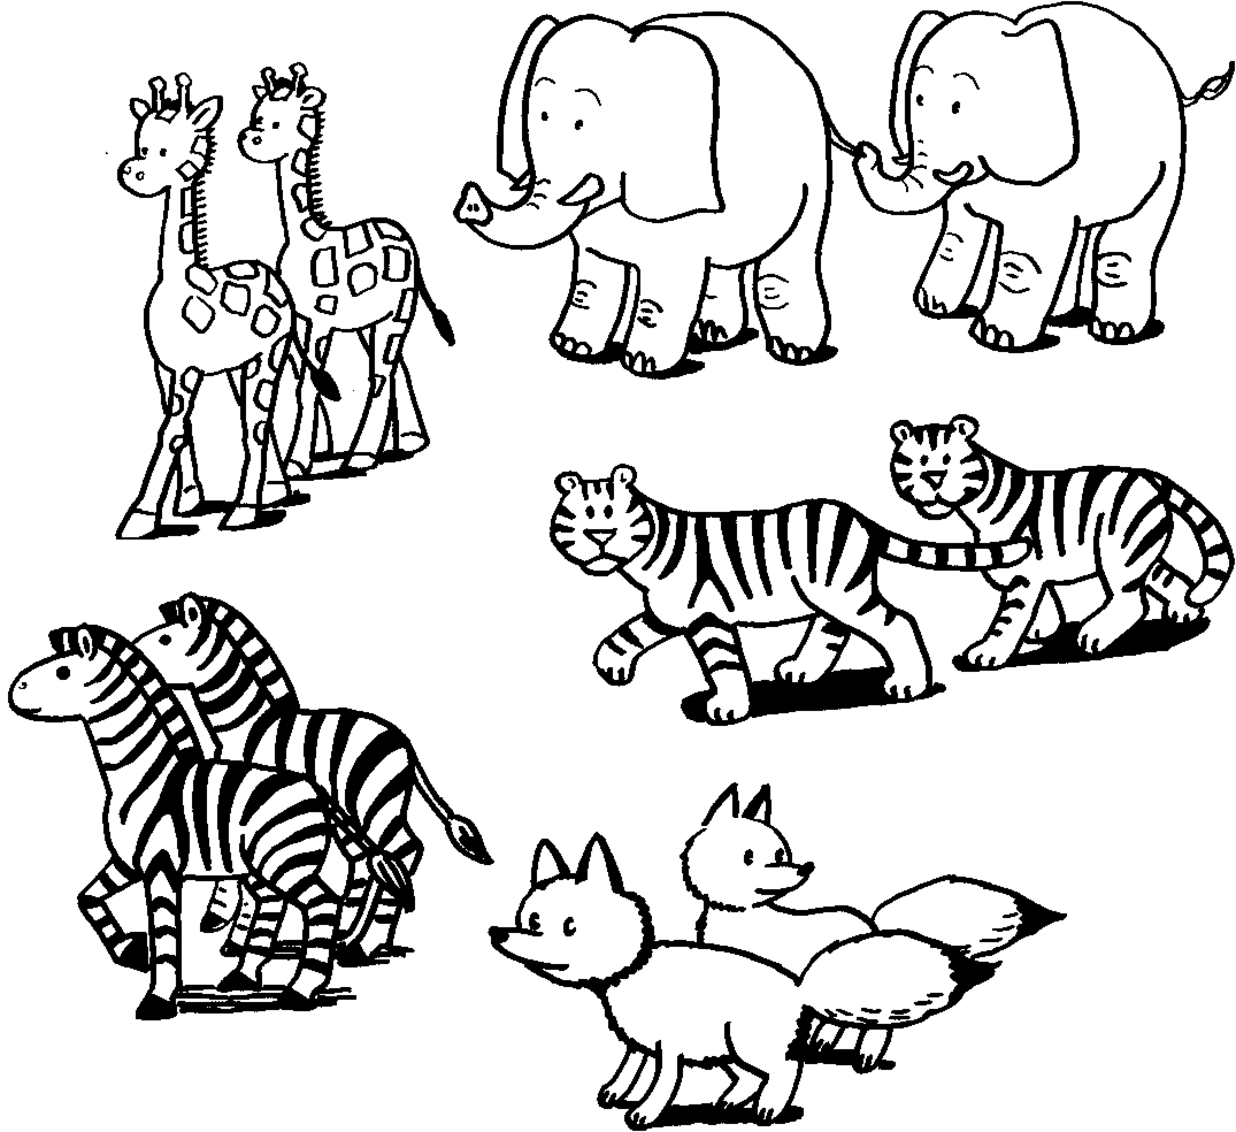 Wild Animal Safari Coloring Pages - High Quality Coloring Pages